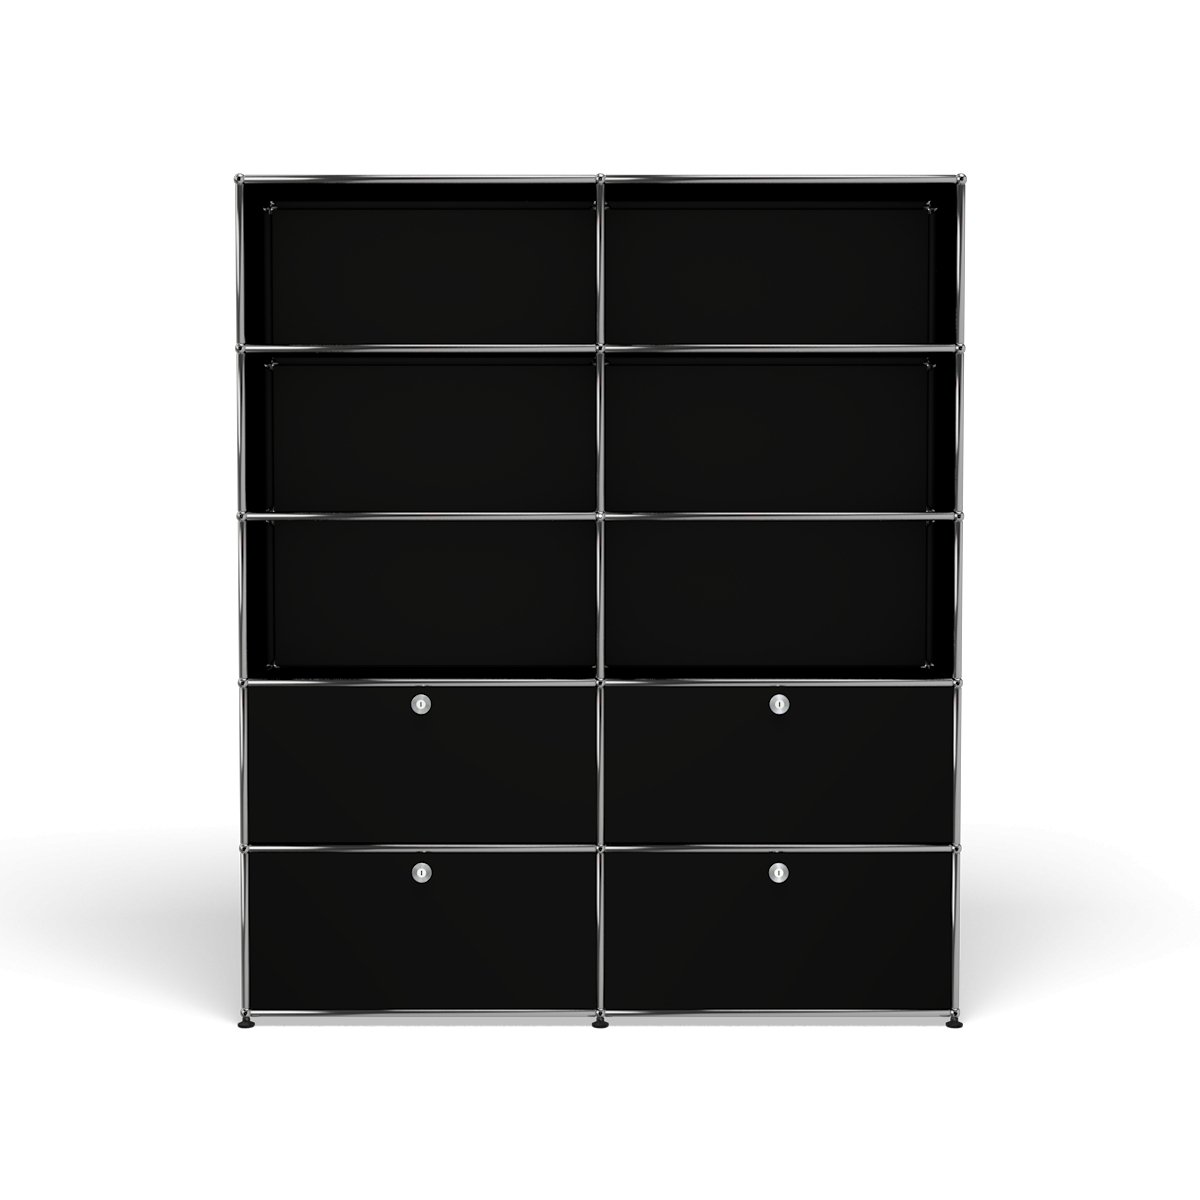 USM Haller Large Contemporary Shelving with Storage (R2) in Graphite Black